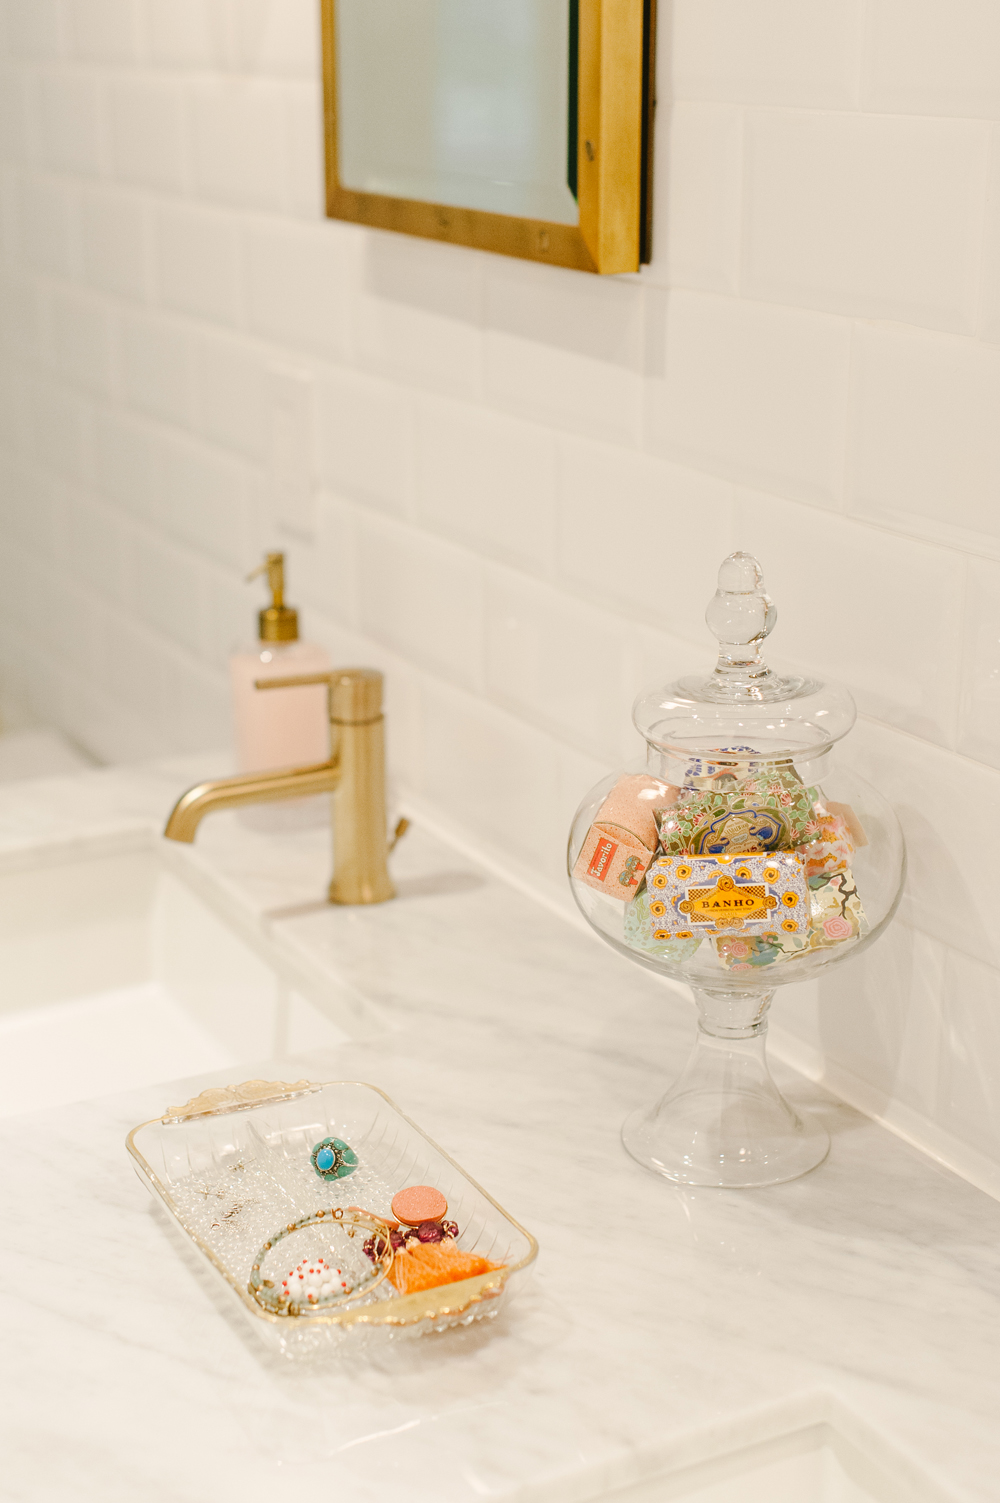 Decorative soaps on display in glass canister on bathroom vanity